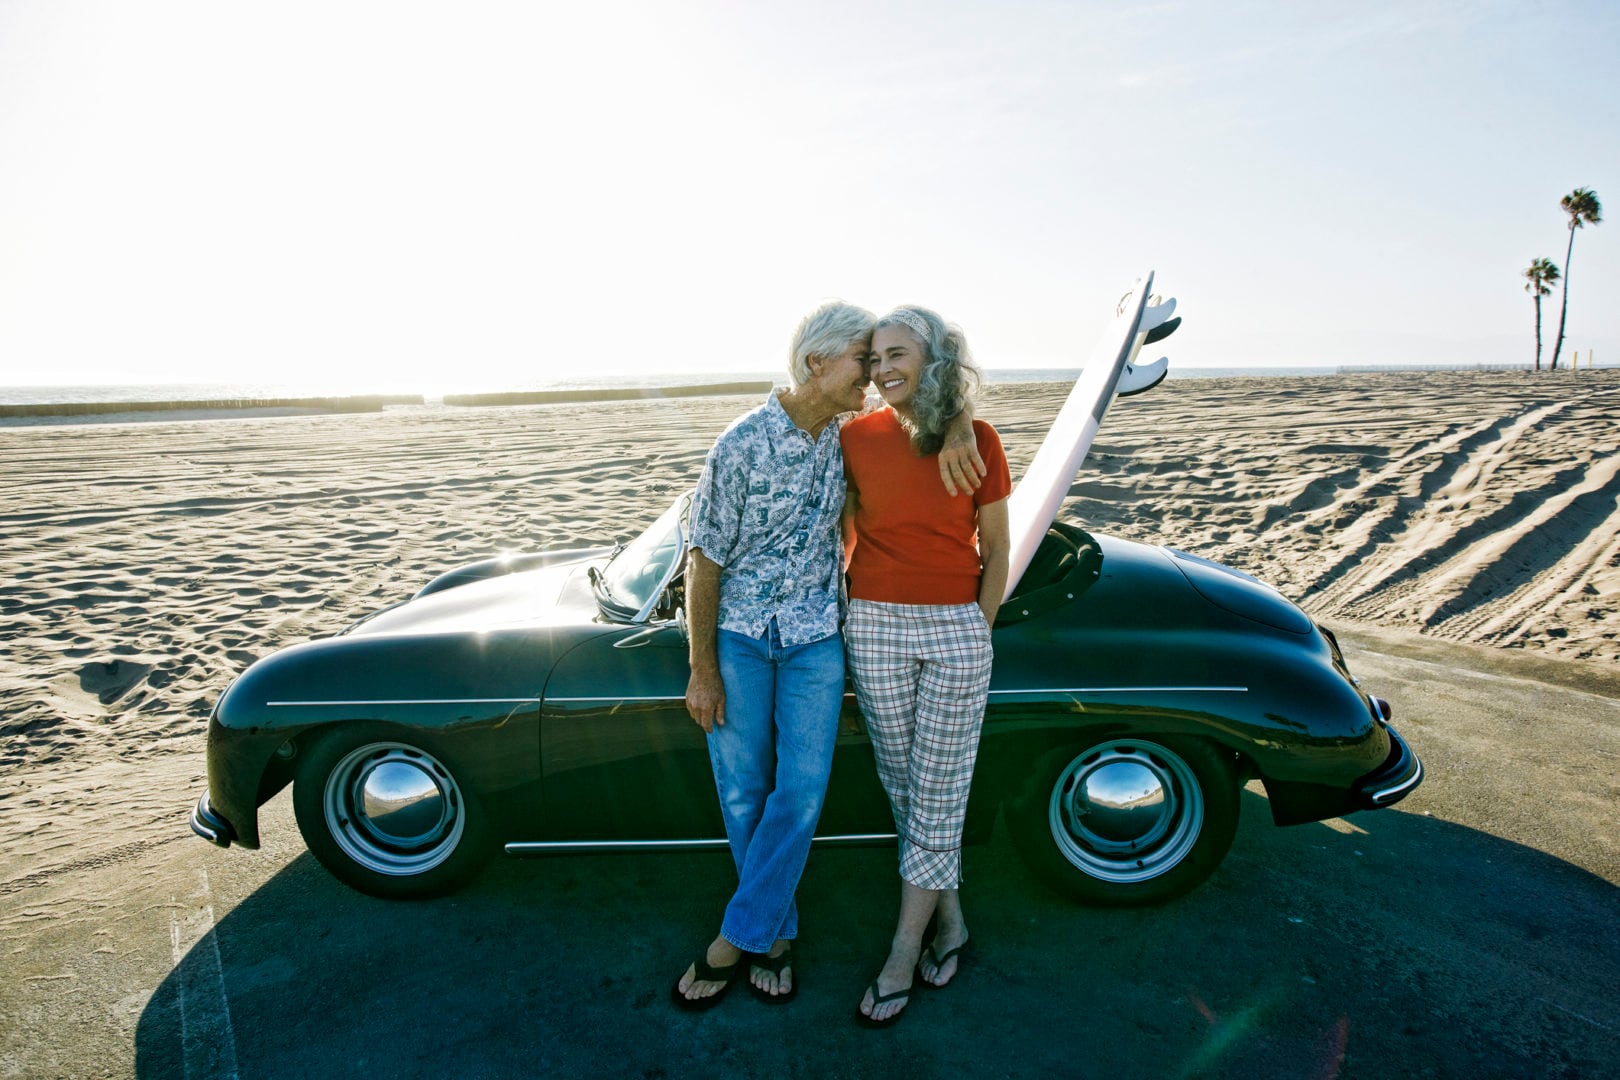 As baby boomers move into old age, who will care for us?